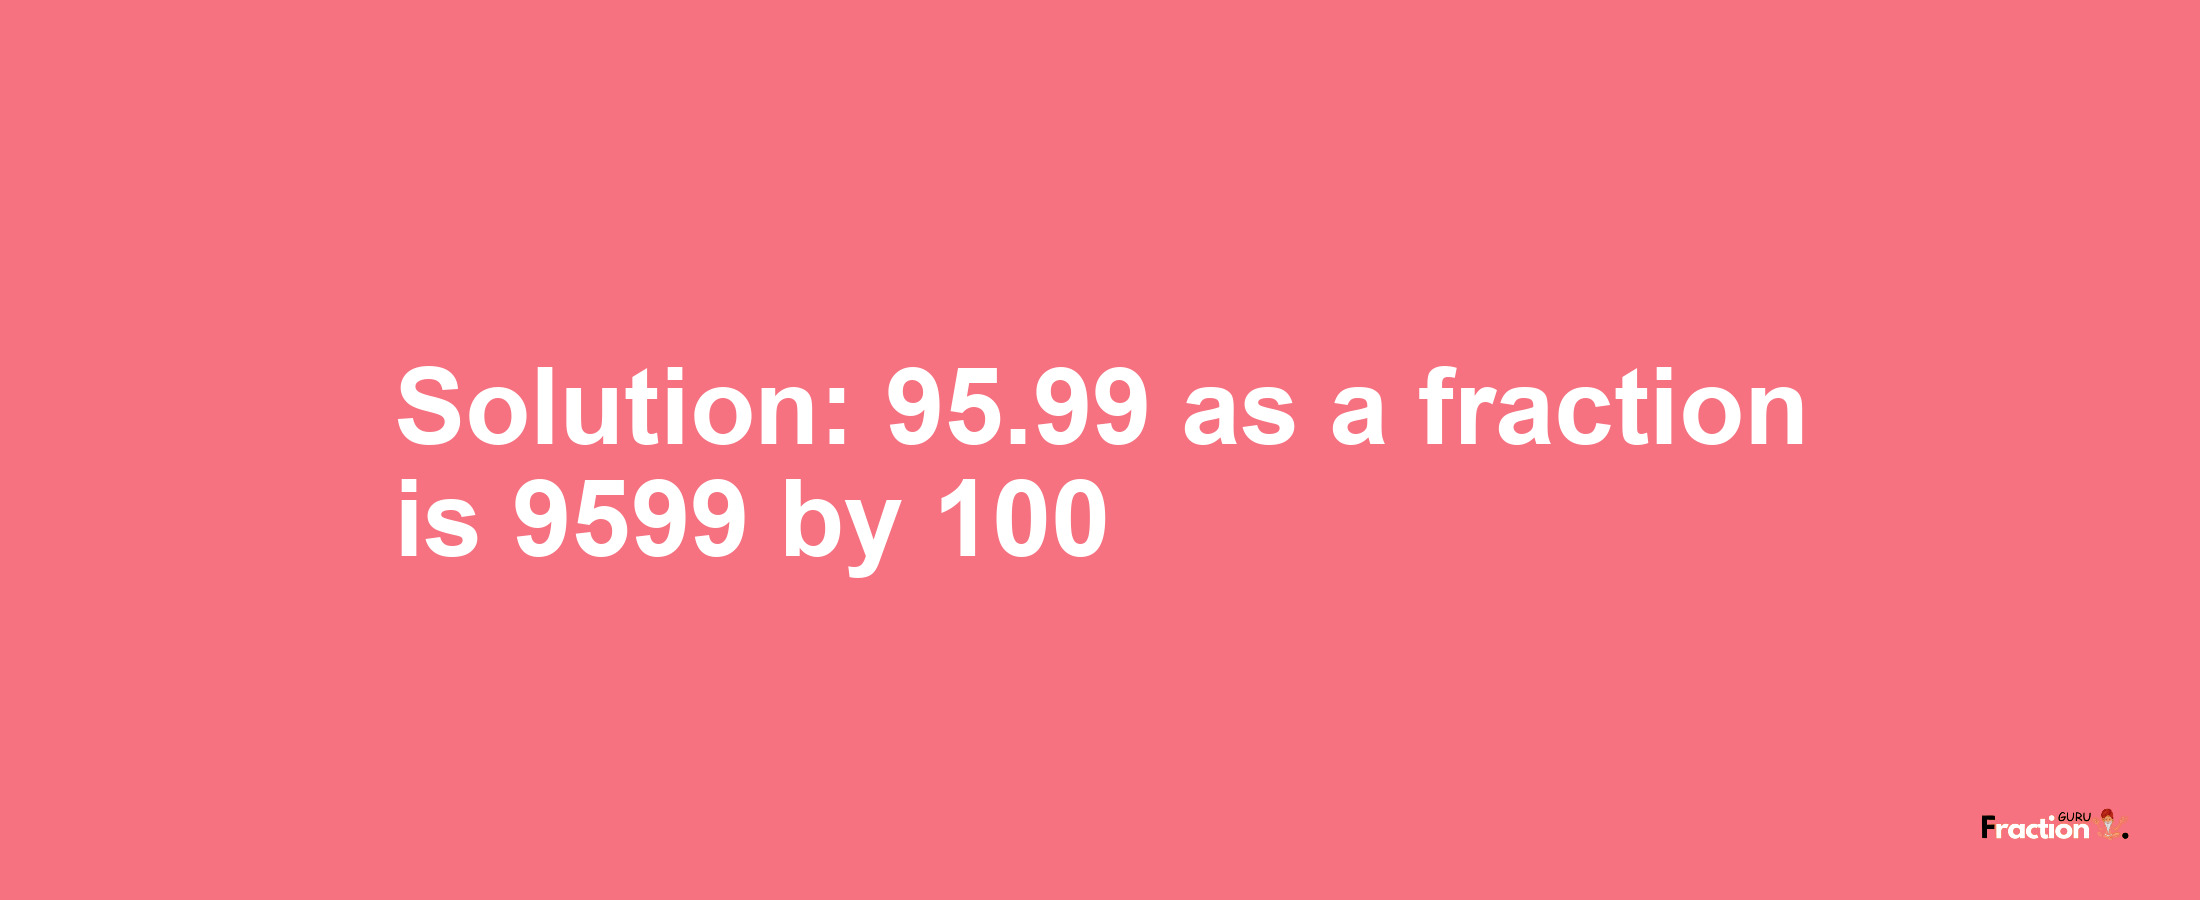 Solution:95.99 as a fraction is 9599/100